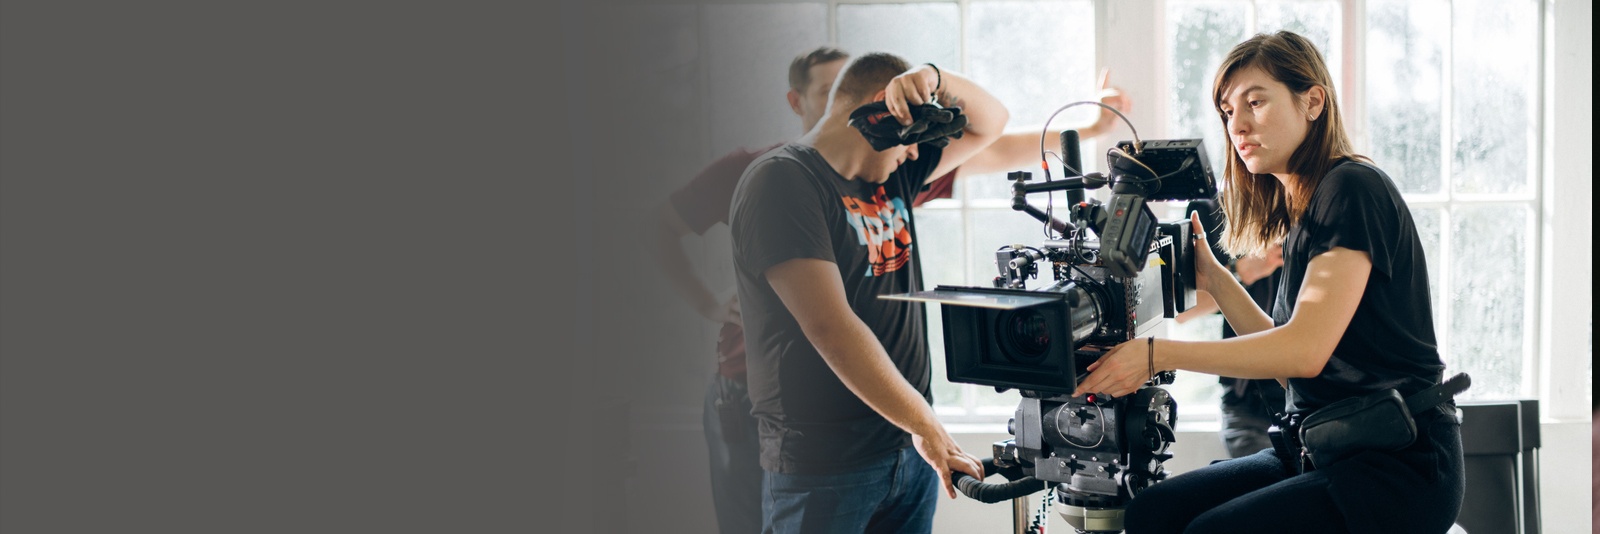 Corporate Video Production & Video Marketing for Businesses in Charlotte, North Carolina